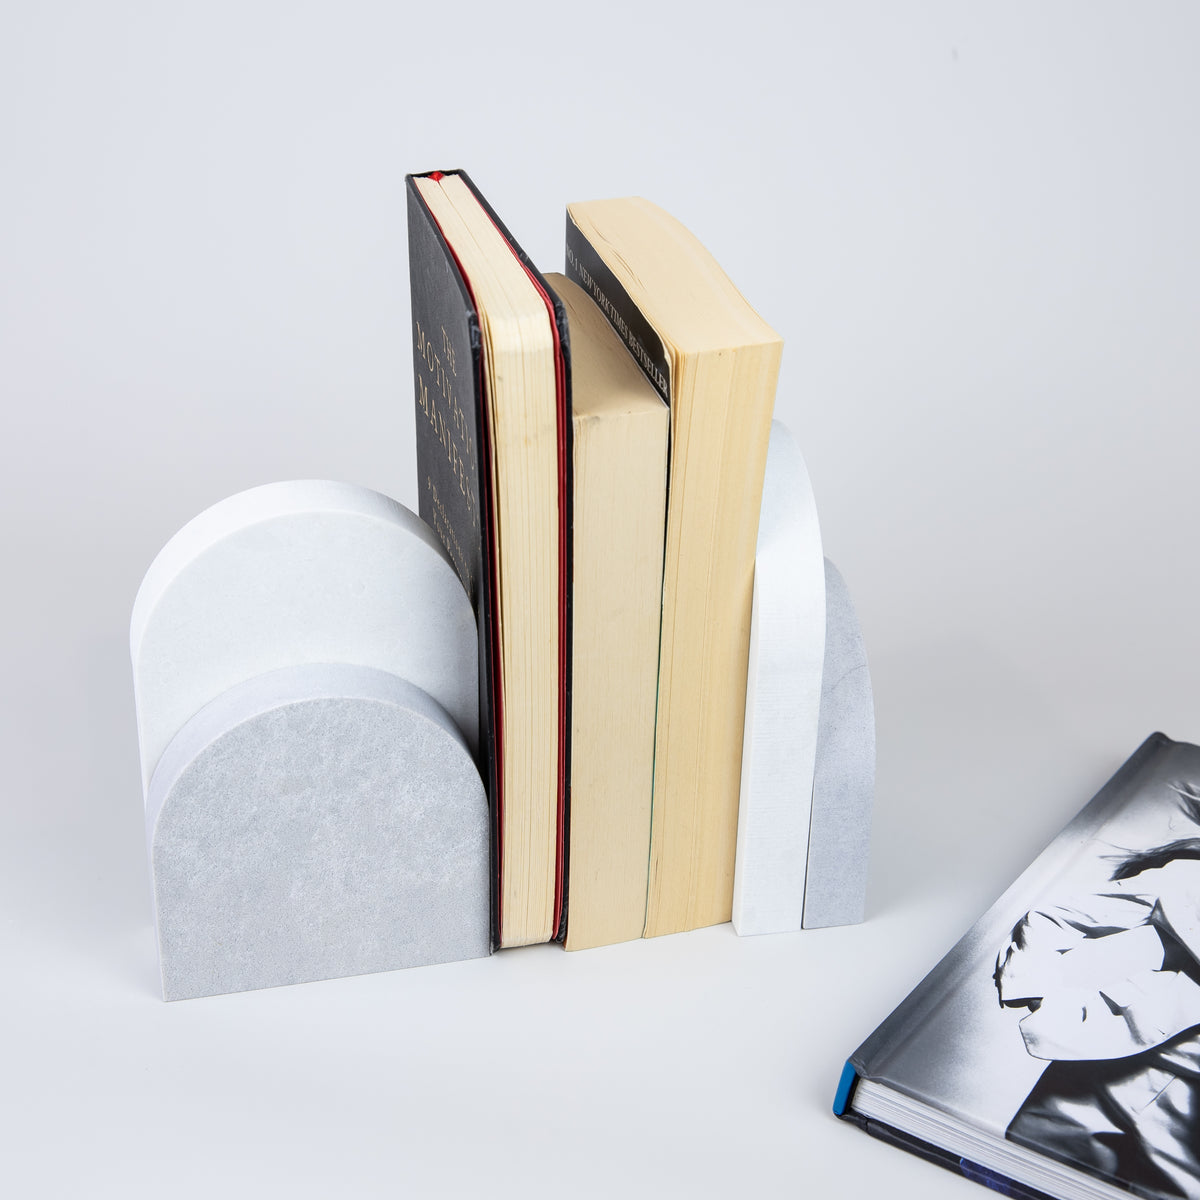 Quartz Bookend Set is 4cm thick. Styled with books. Available in Airy Concrete partnered with Organic White by Caesarstone the feel of concrete in full movement, meets a clean white surface with subtly blended undertones, reflecting a natural appearance that is effortlessly chic. The perfect addition to your home decor, similar to marble bookends.